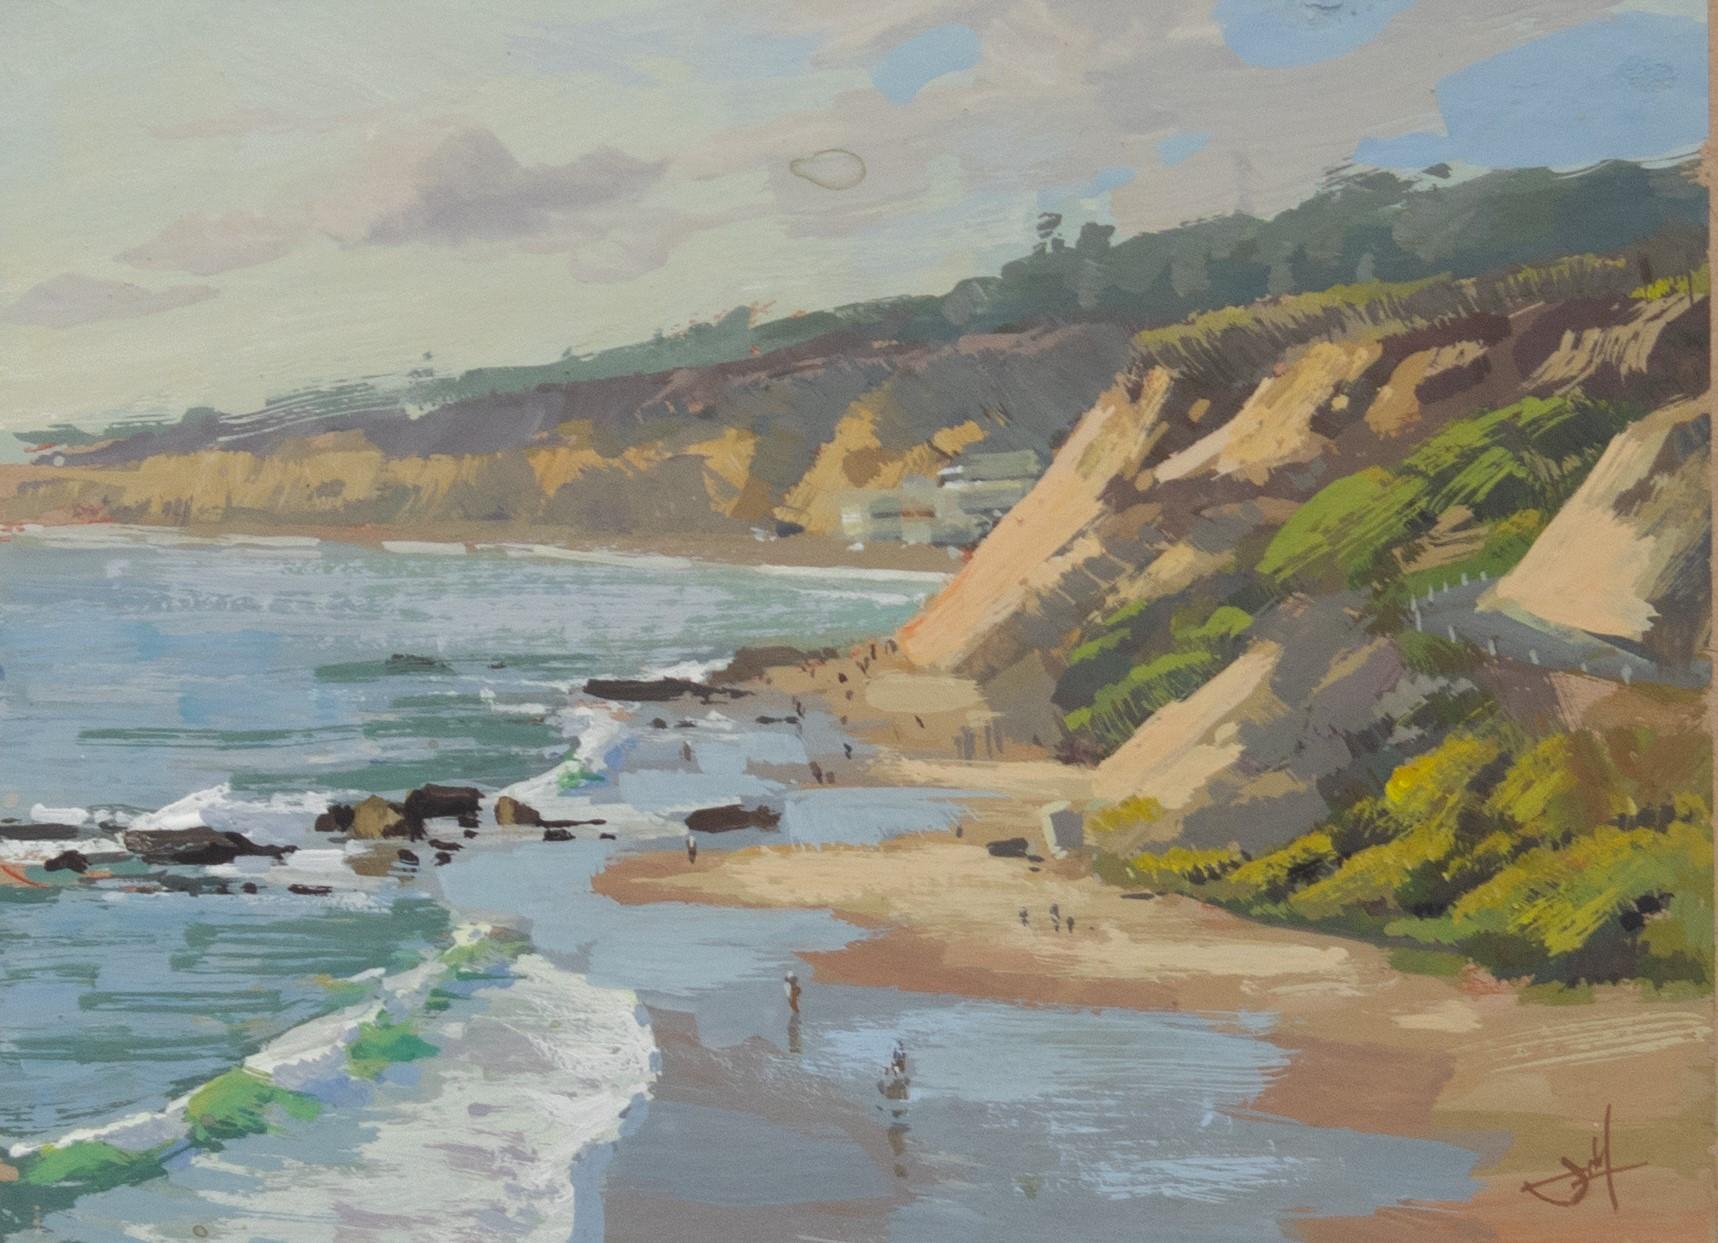 Judd Mercer Landscape Painting - "Crystal Cove, " Gouache painting